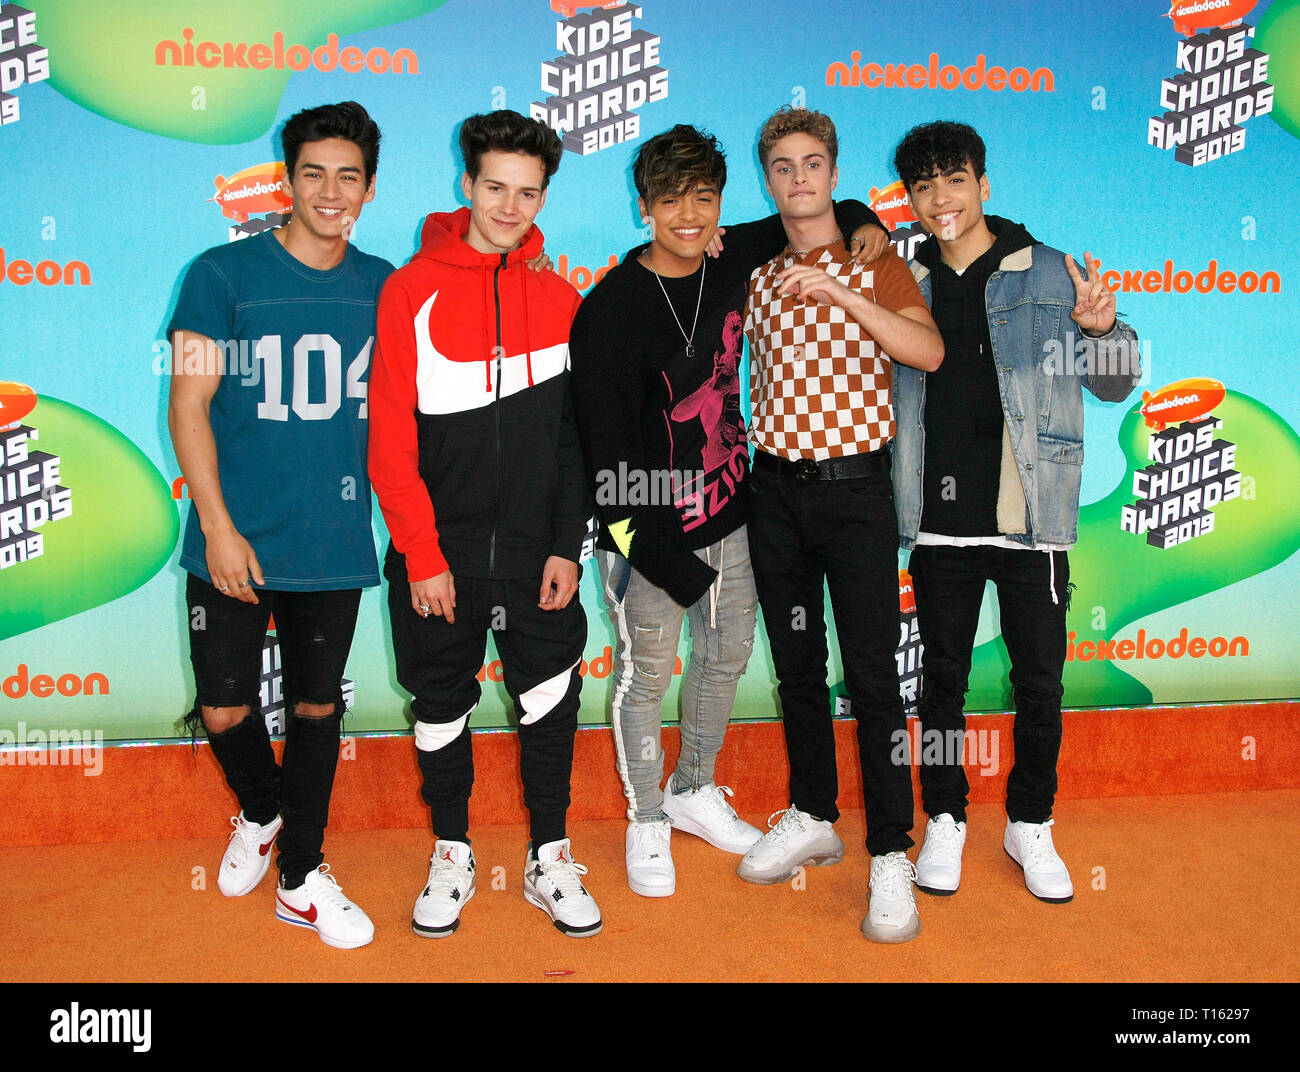 Los Angeles, USA. 23rd Mar, 2019. Michael Conor, Sergio Calderon Jr., Drew Ramos, Chance Perez, Brady Tutton of In Real Life attend Nickelodeon's 2019 Kids' Choice Awards at Galen Center on March 23, 2019 in Los Angeles, California. Photo: imageSPACE Credit: Imagespace/Alamy Live News Stock Photo